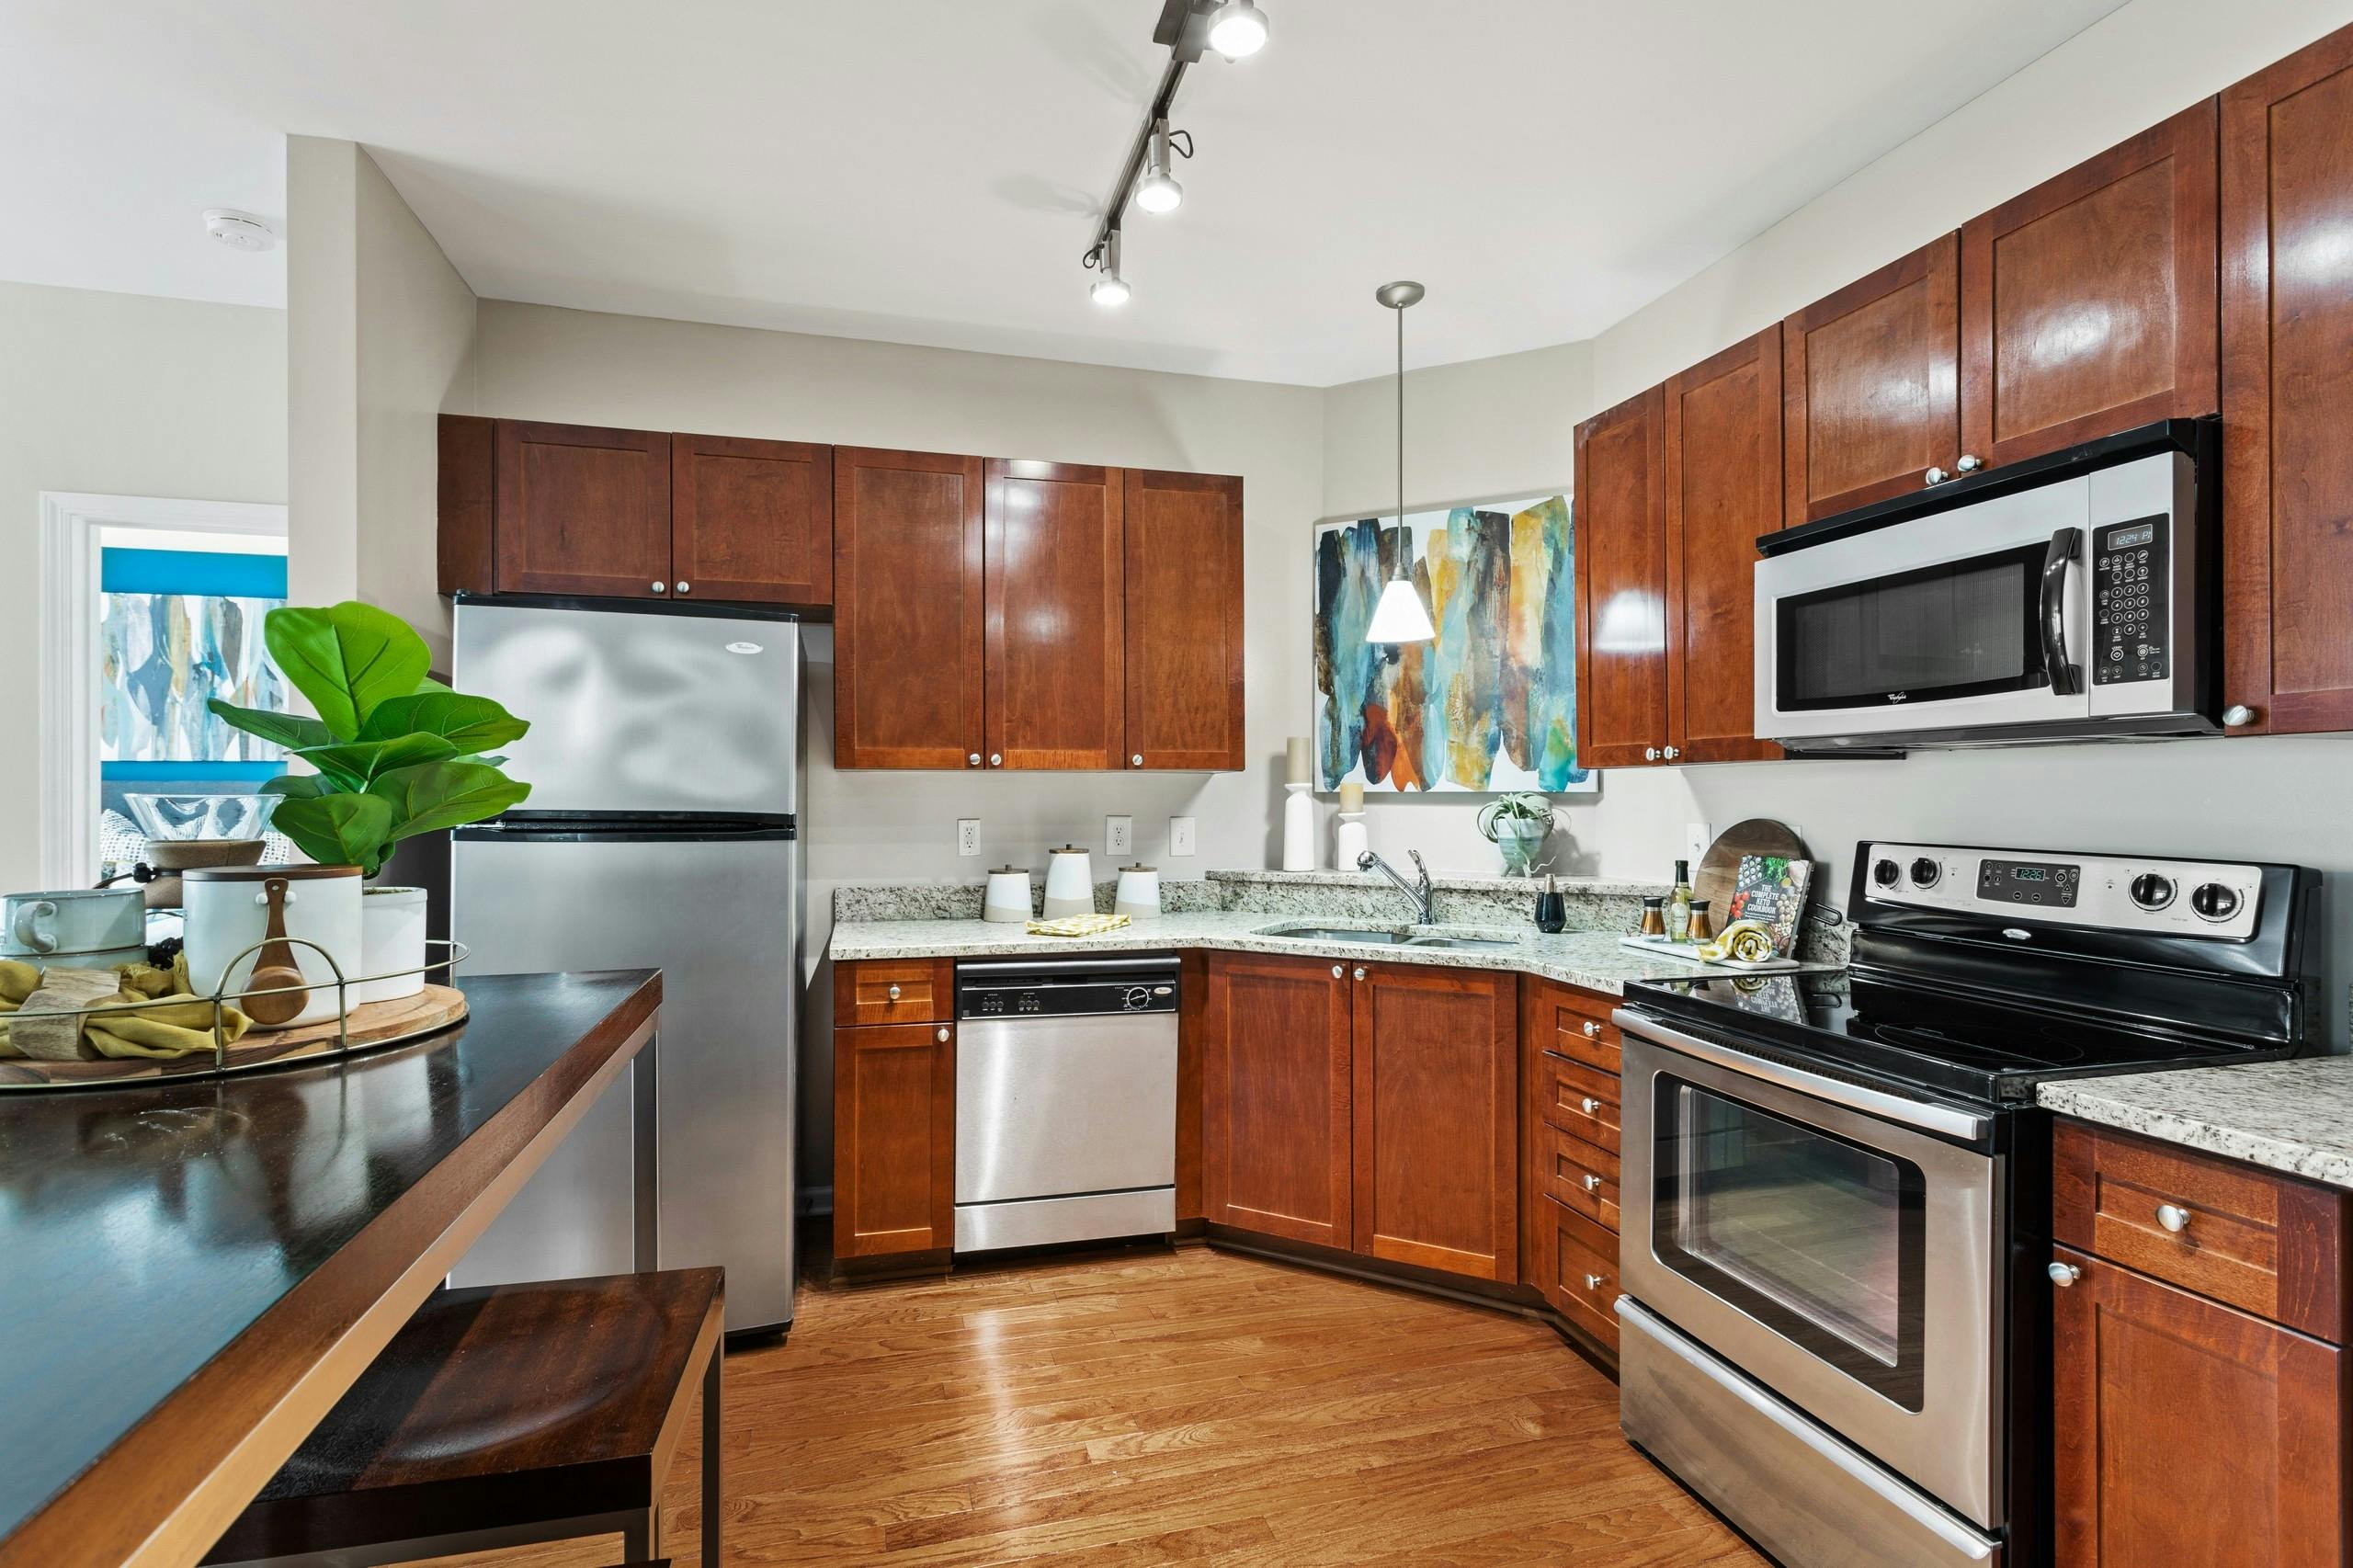 View of the kitchen with wood cabinets and stainless appliances and granite countertops at AMLI Lindbergh apartments